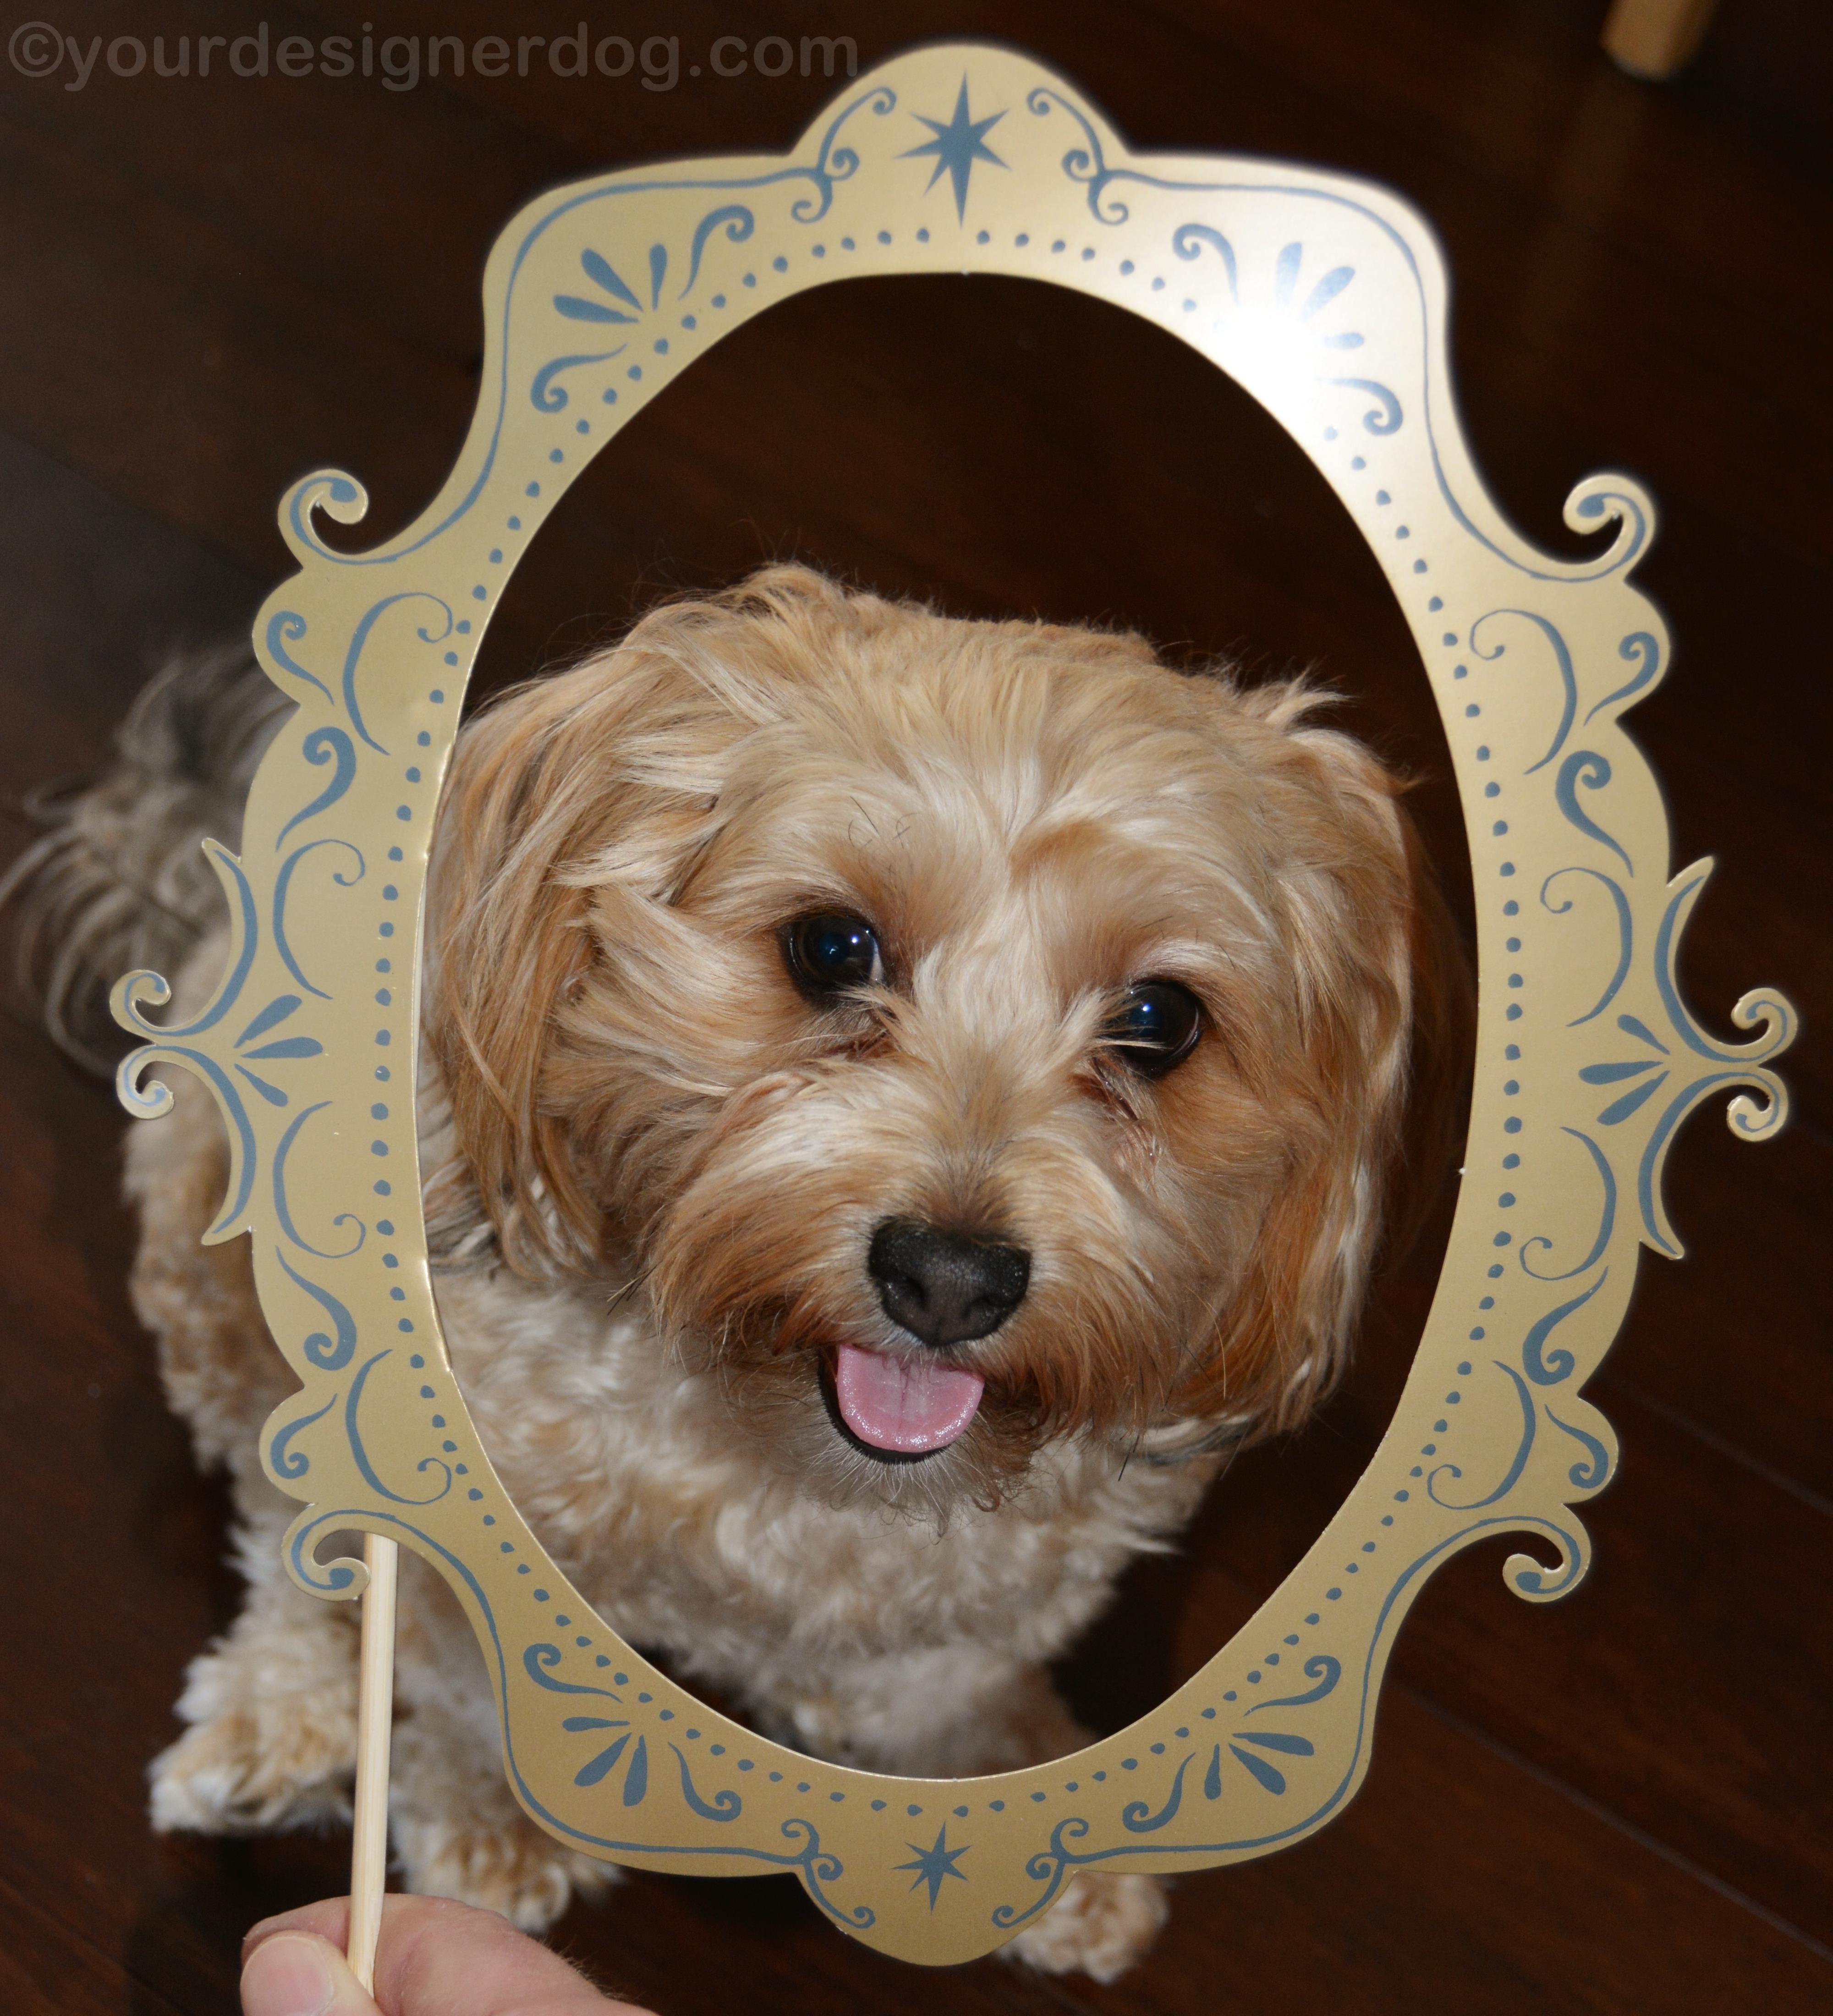 dogs, designer dogs, yorkipoo, yorkie poo, frame, tongue out